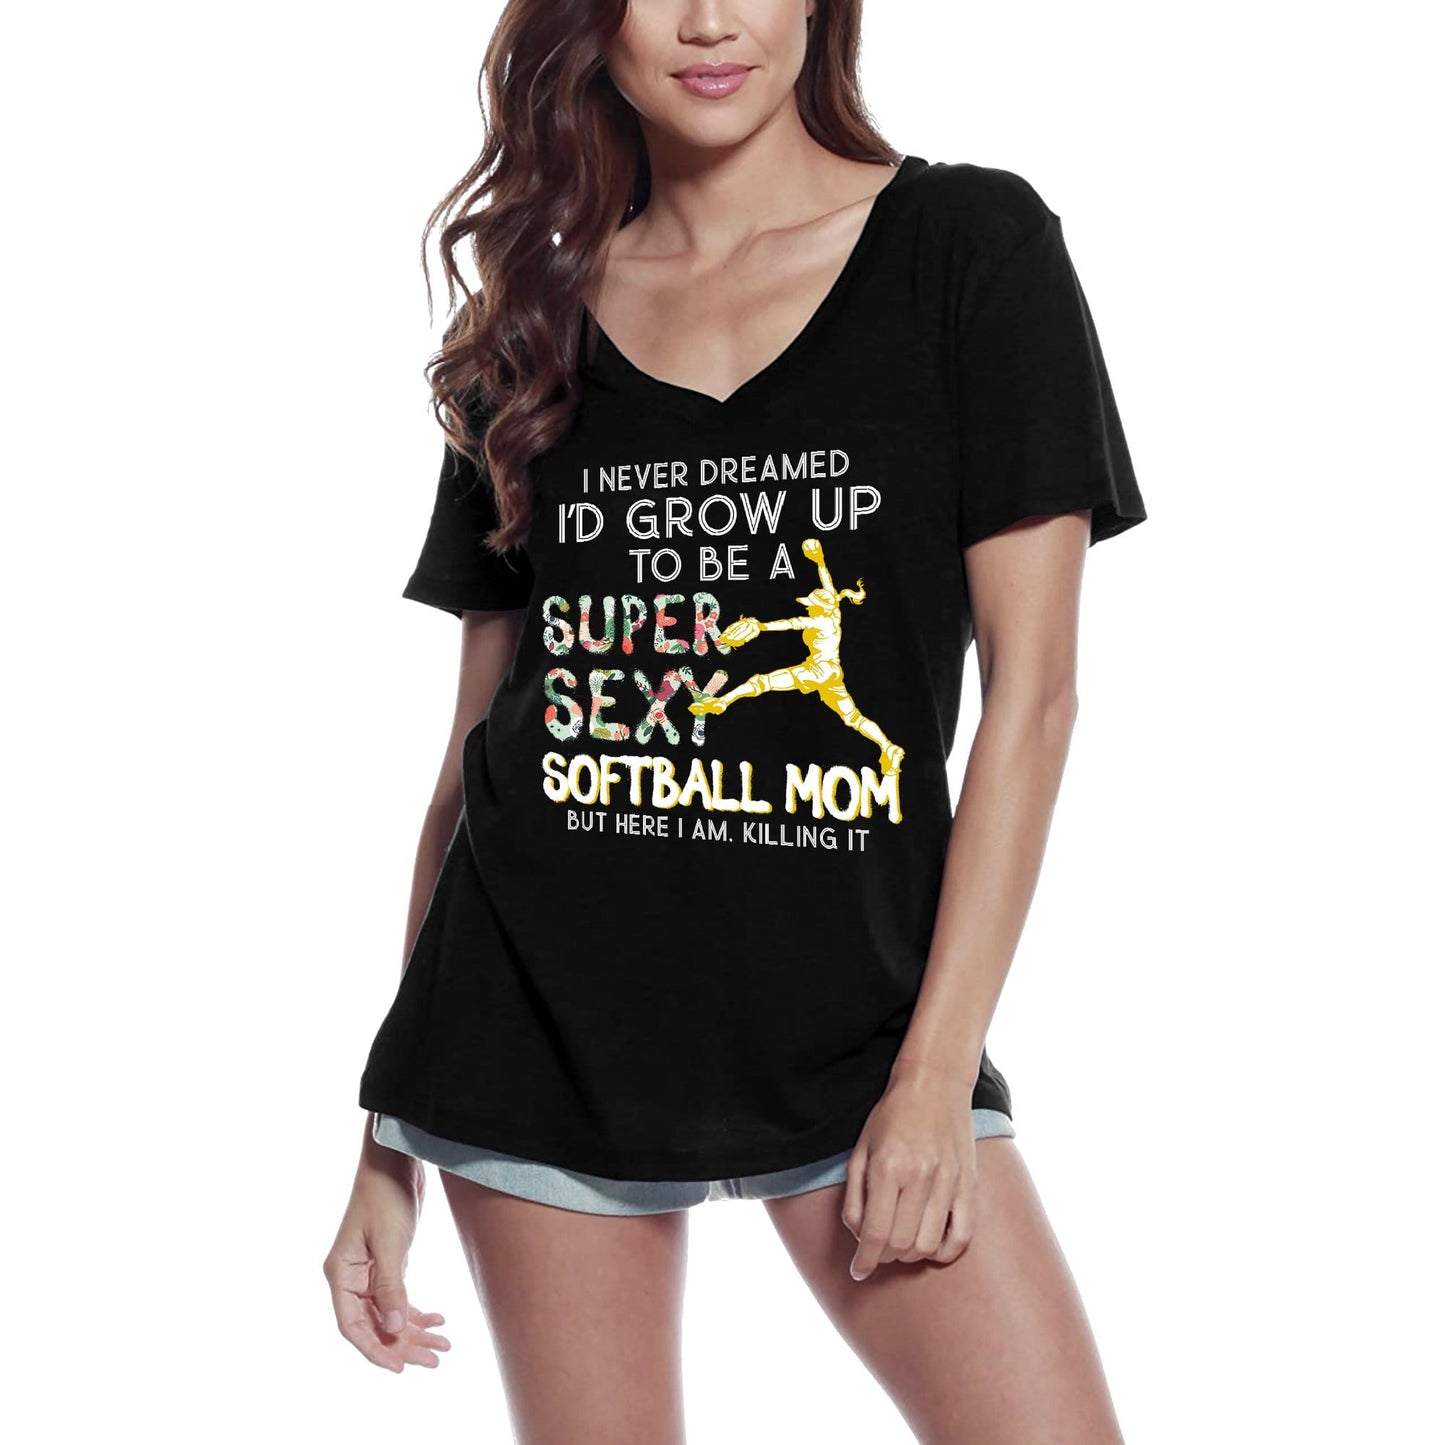 ULTRABASIC Women's T-Shirt I Never Dreamed I Would Grow Up to be a Super Sexy Softball Mom - Funny Mother Tee Shirt